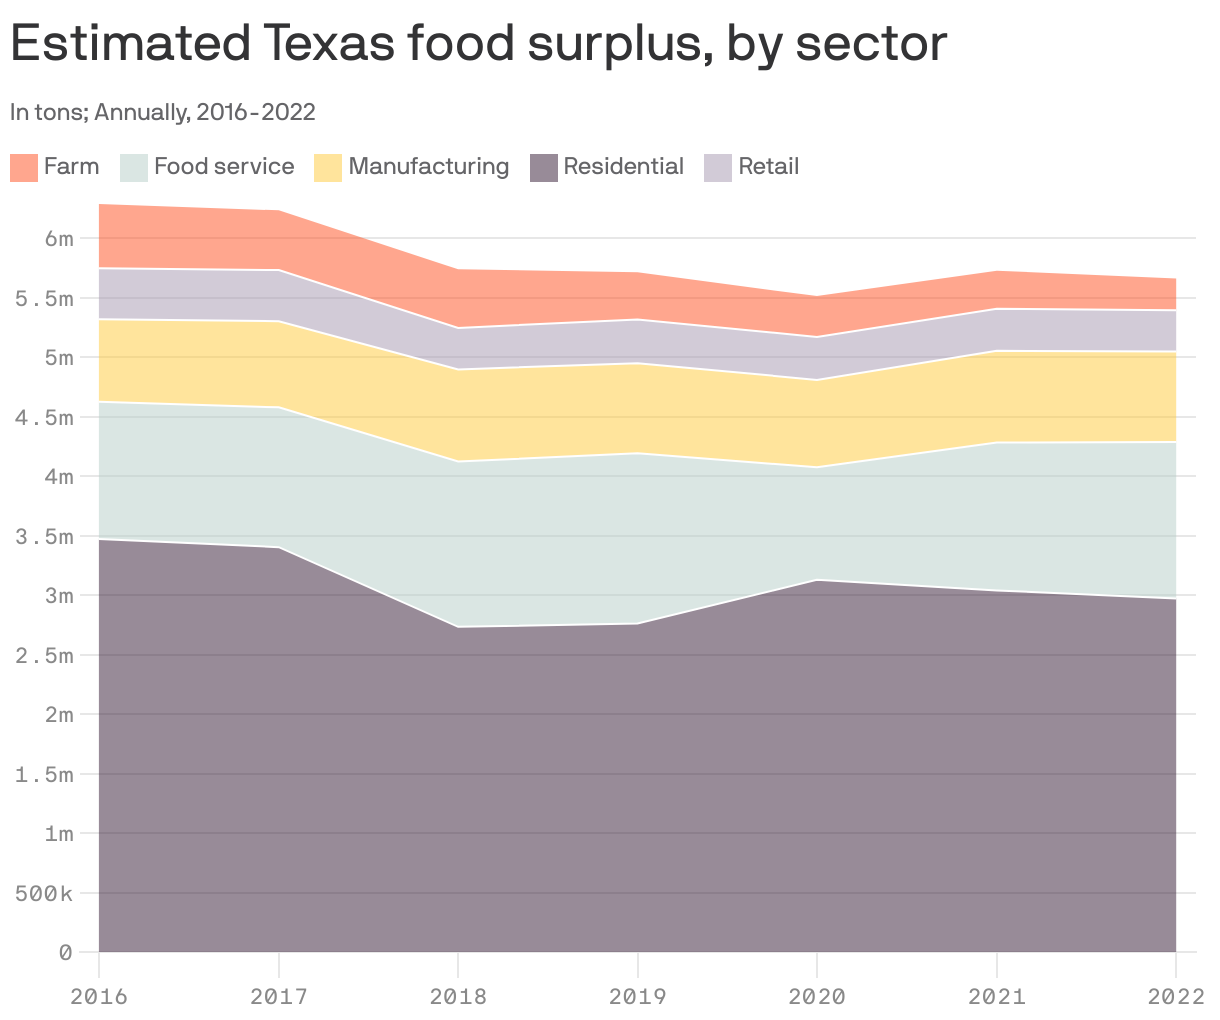 Estimated Texas food surplus, by sector